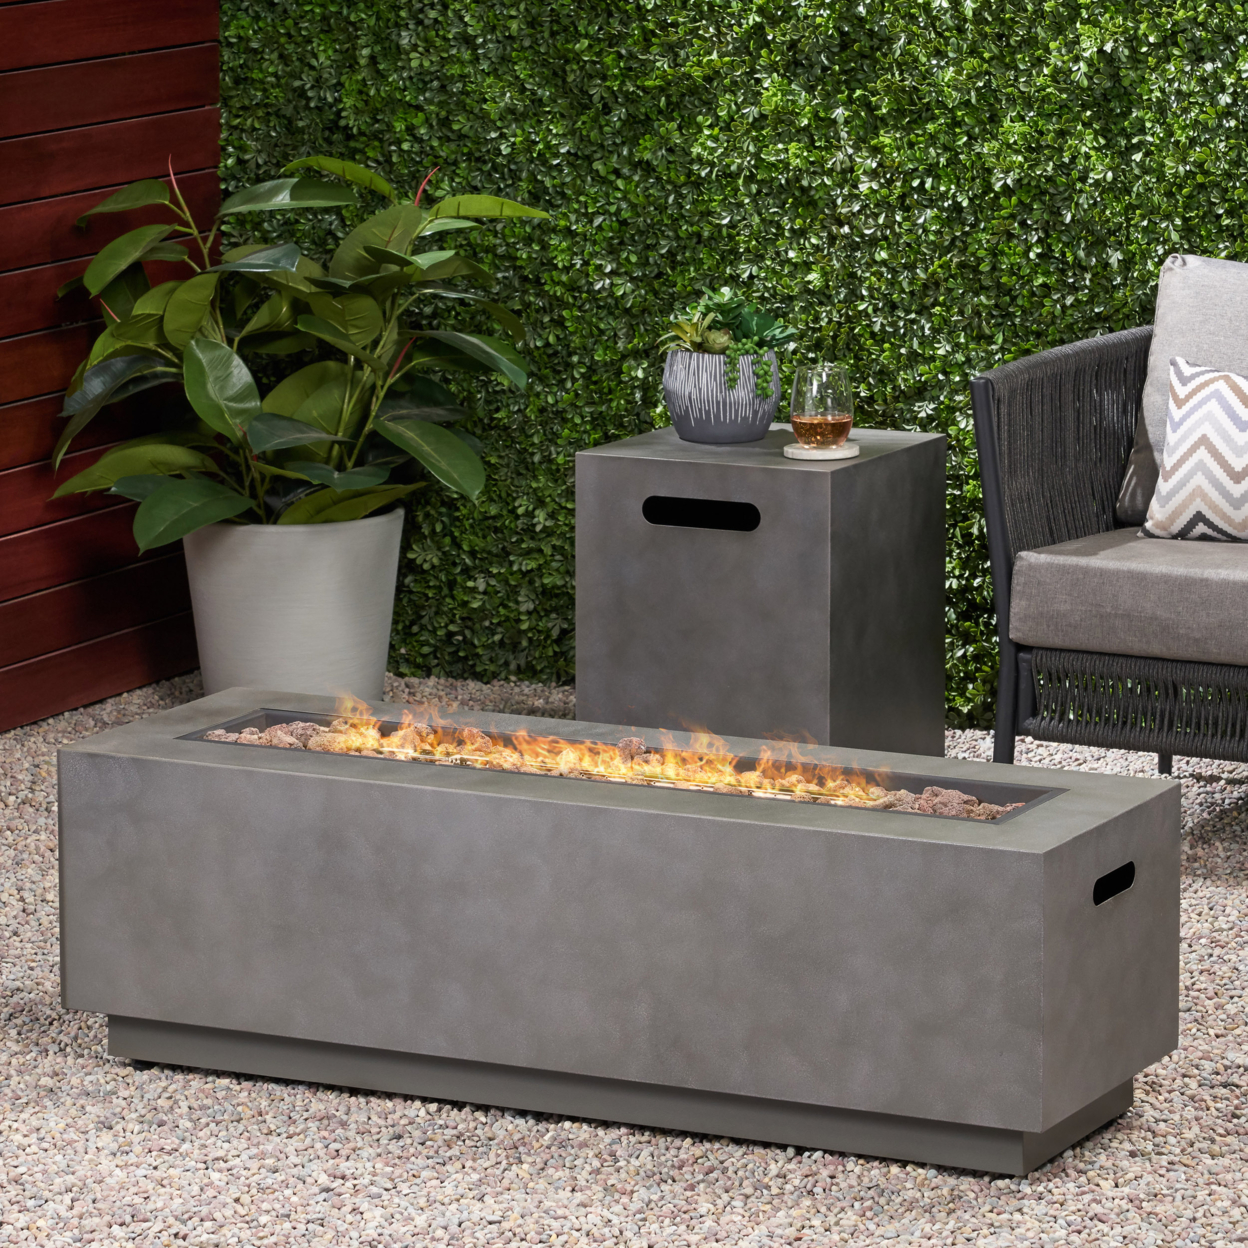 Hemmingway Outdoor Rectangular Fire Pit With Tank Holder - Concrete Finish